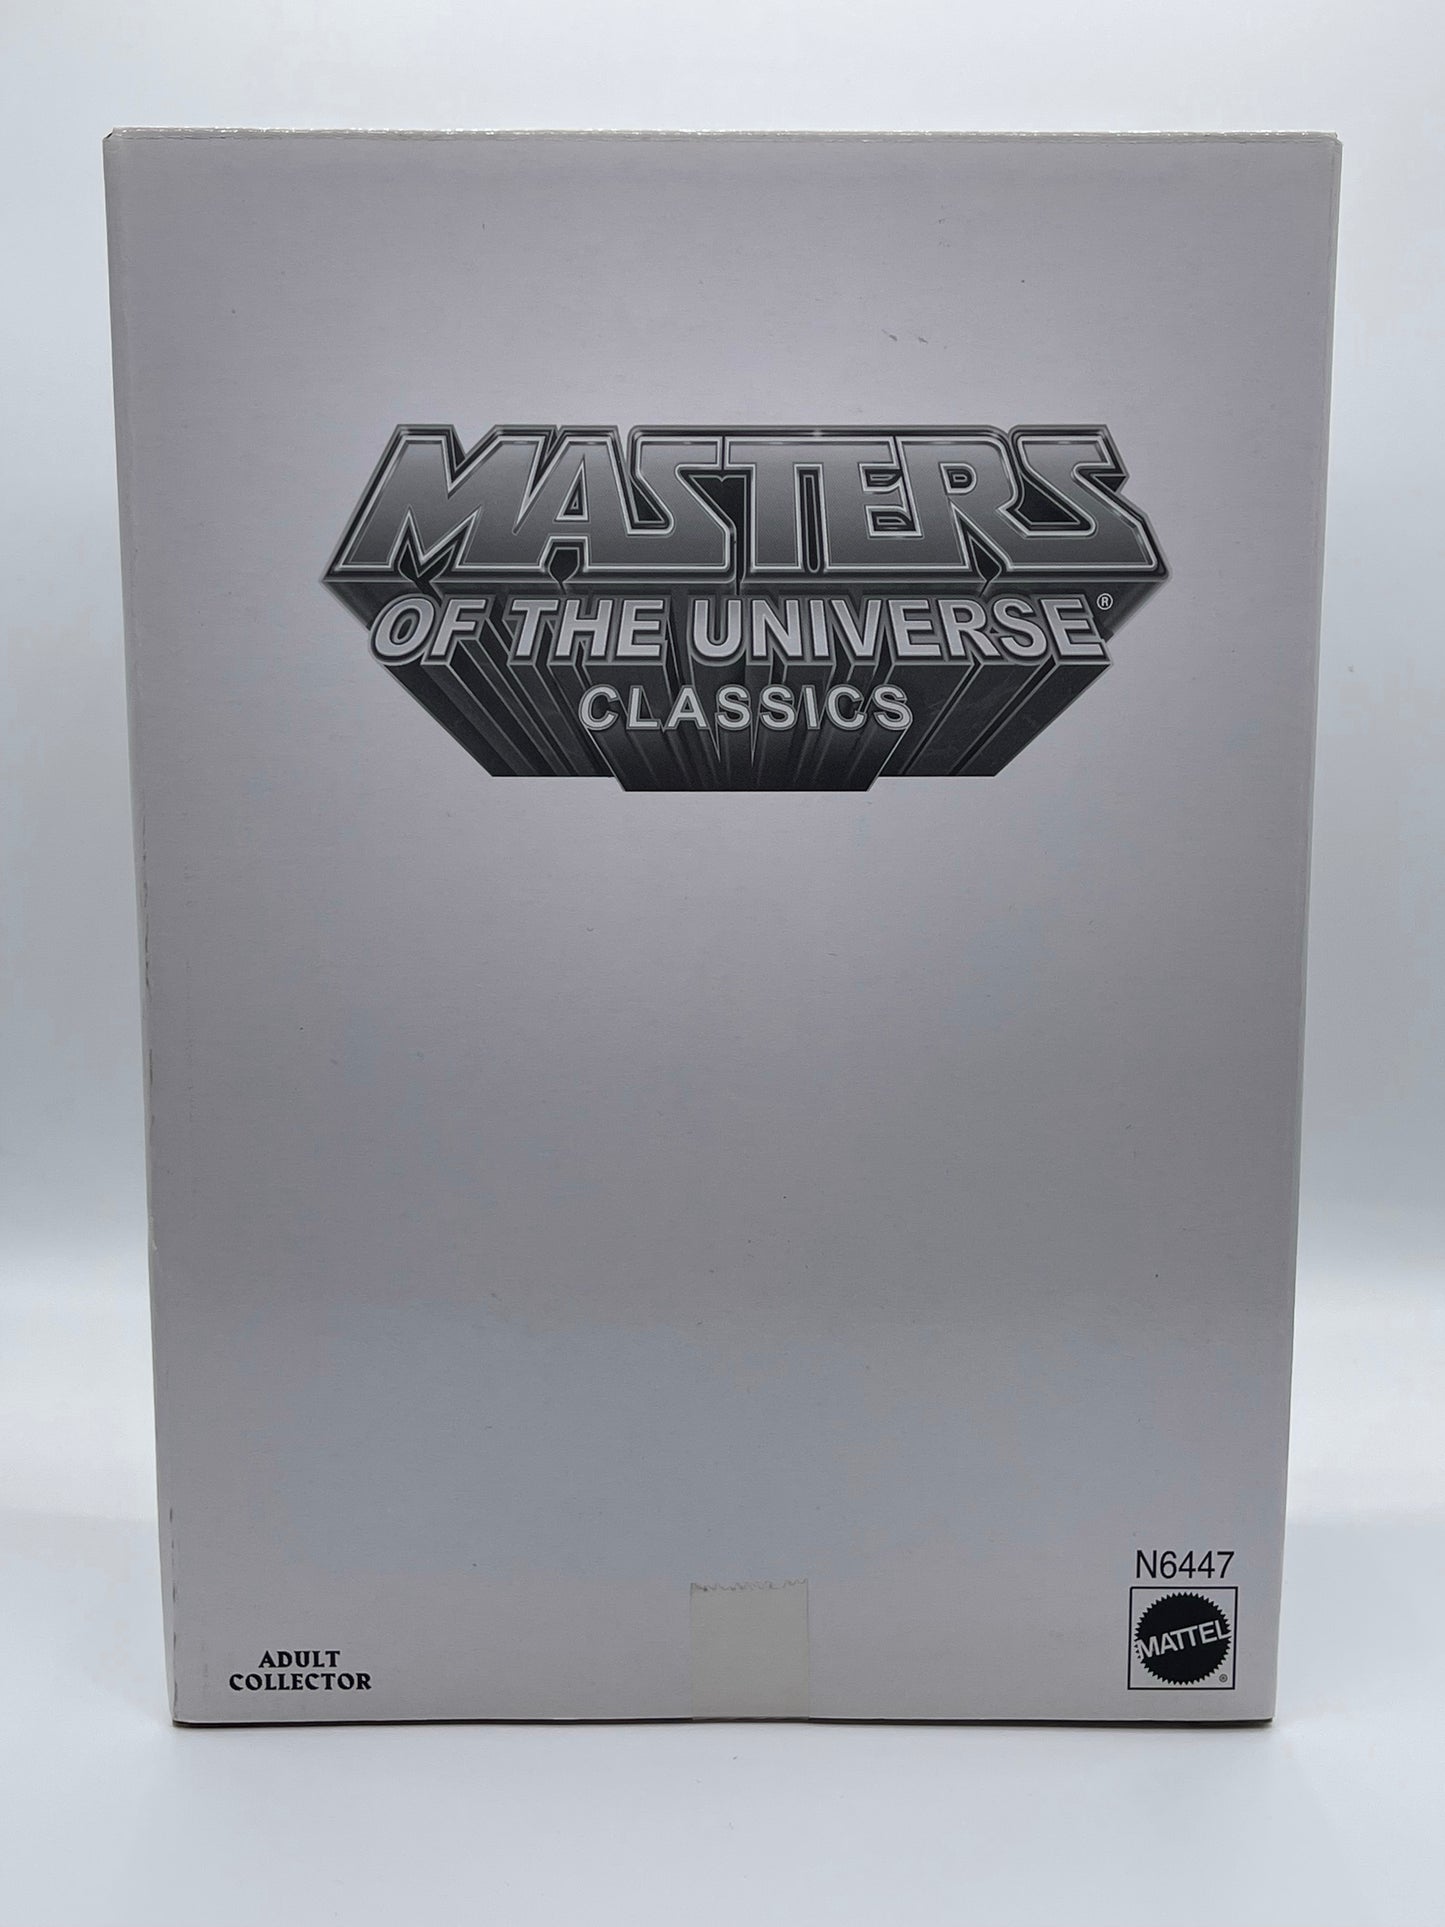 Masters of the Universe Classics He-Ro